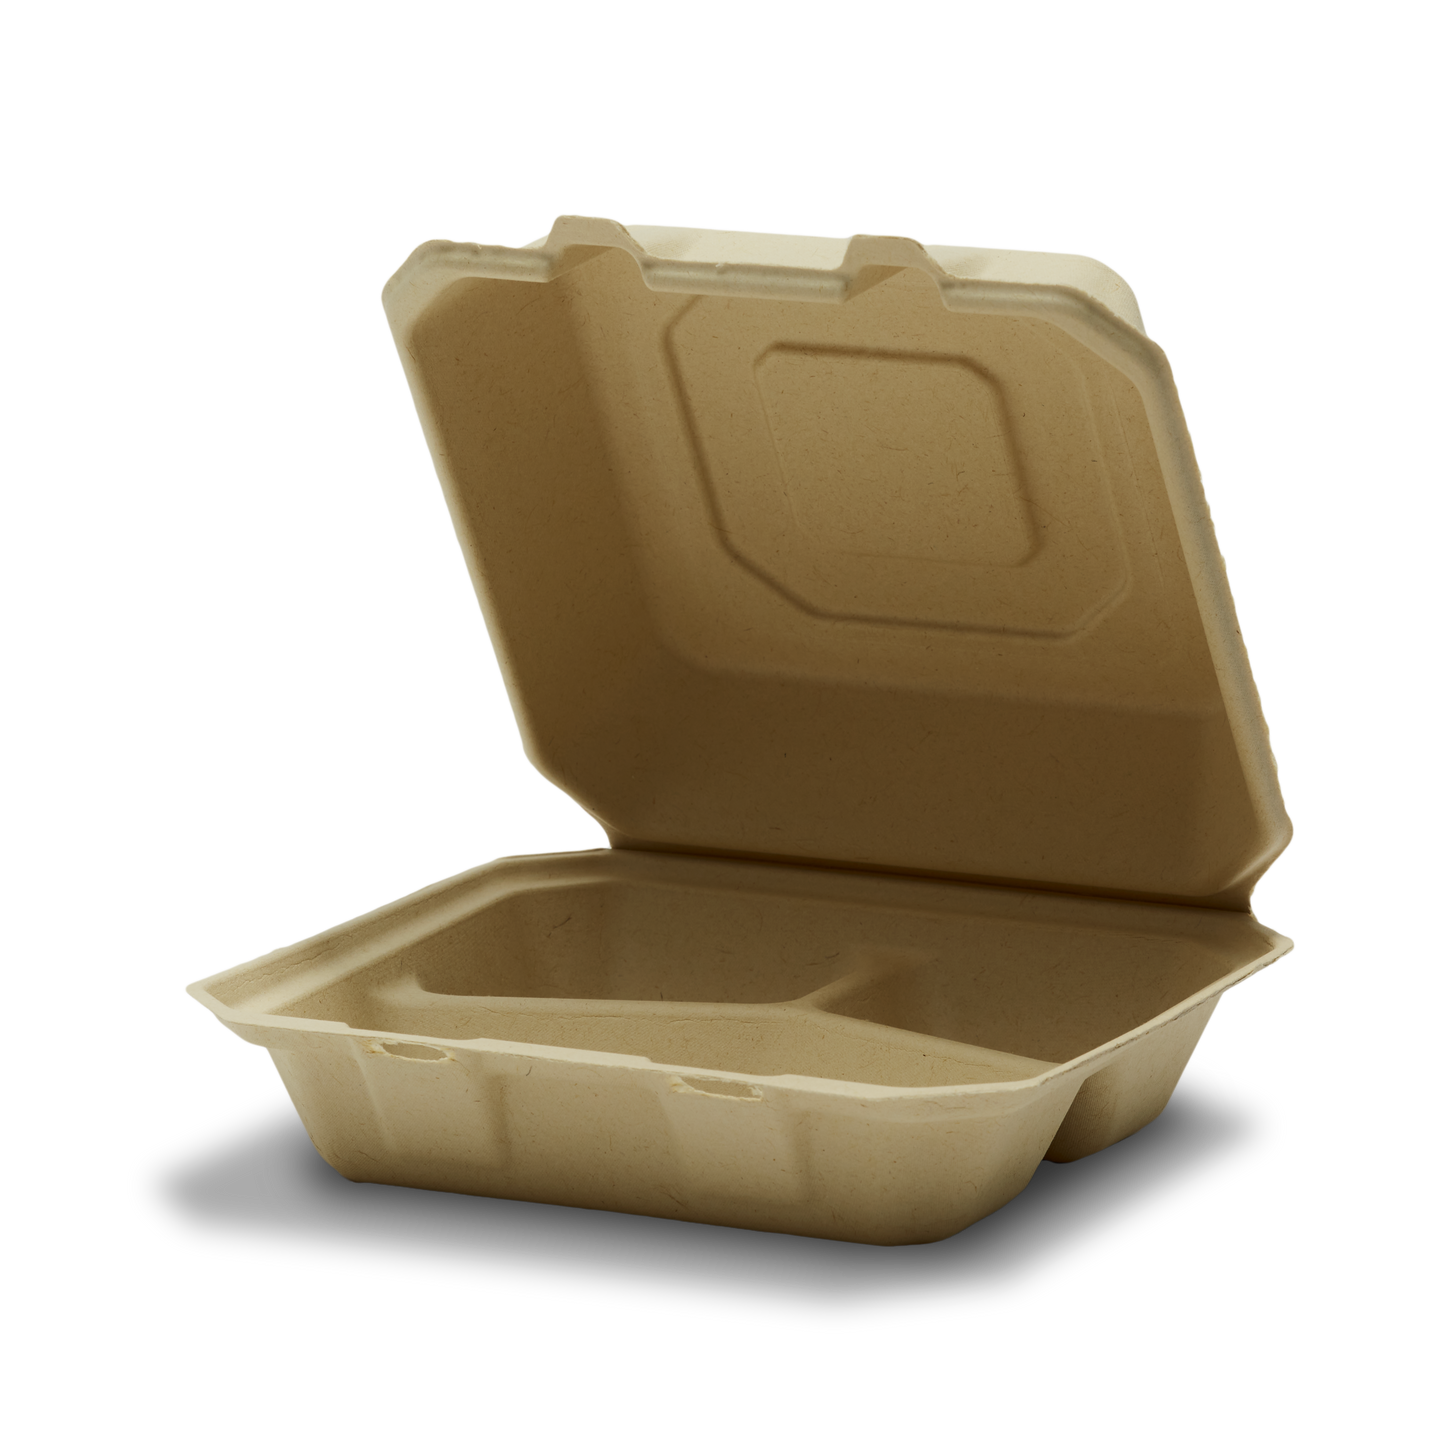 8" Three Compartment Compostable Clamshell for Takeout. Made in the USA from Sugarcane grown in Florida, this container measures 8" by 8" by 3" tall and has two small compartments along with one large compartment closest to the opening.